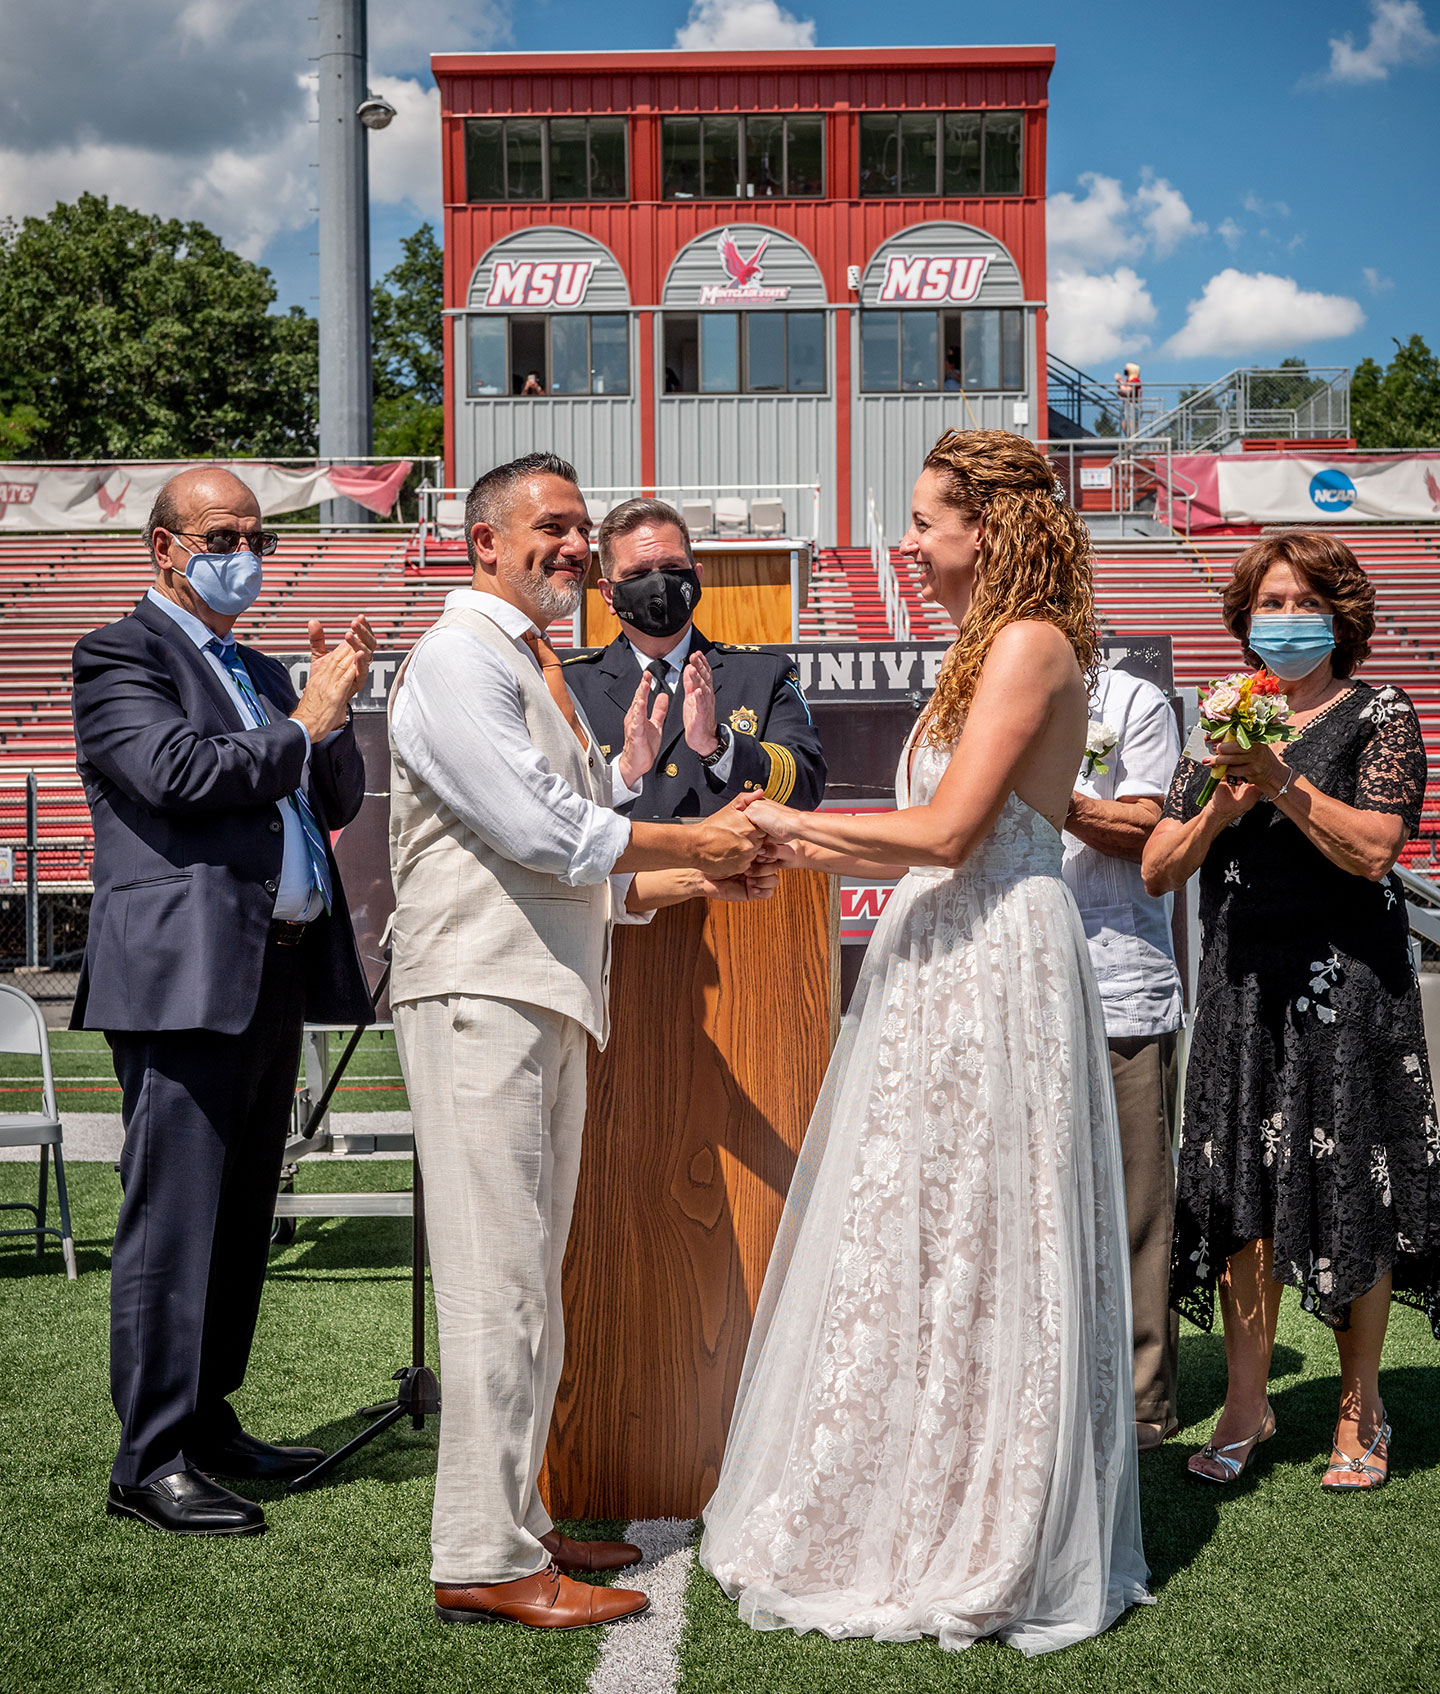 Chief of University Police Paul Cell officiates the wedding of Janet Fenner and Gregory Dabice on the Montclair State 50-yard line.